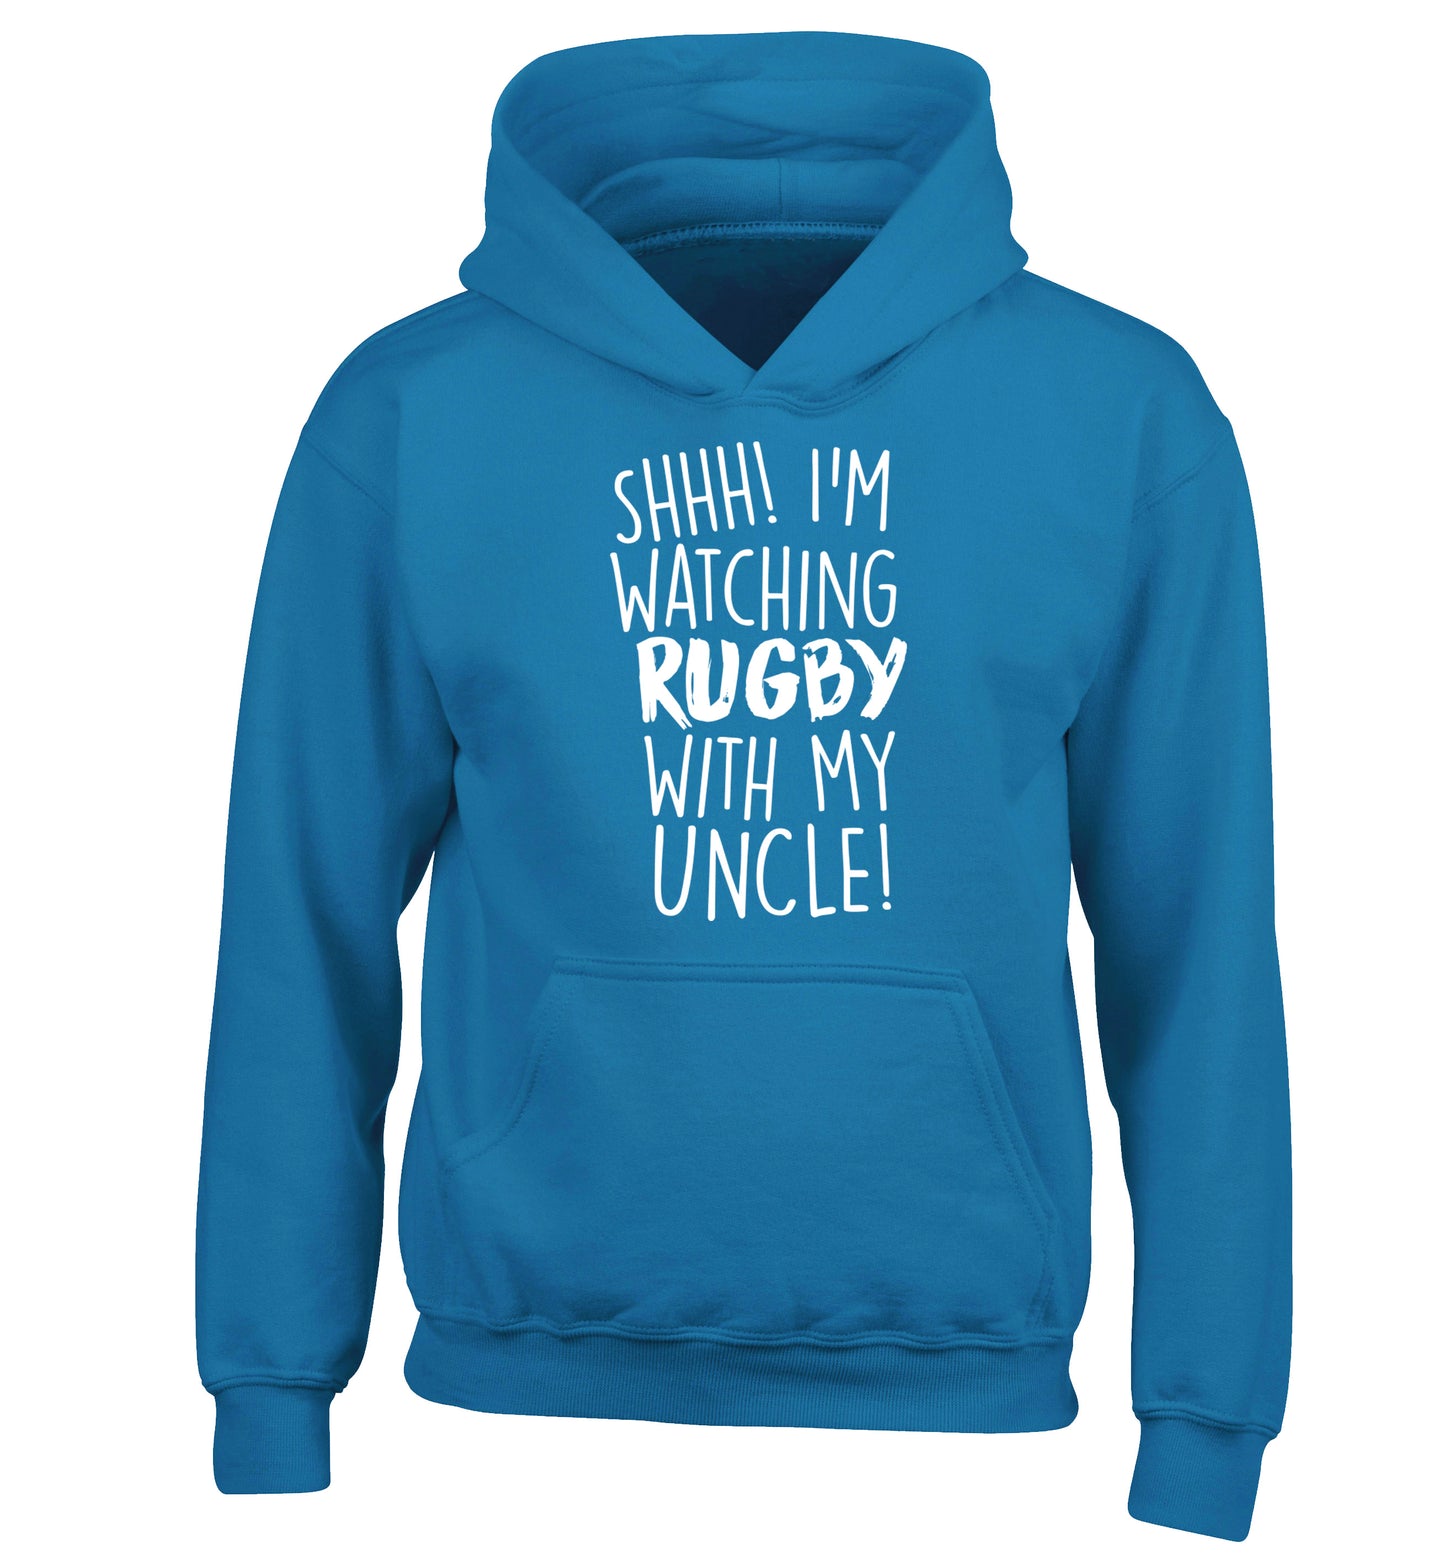 Shh.. I'm watching rugby with my uncle children's blue hoodie 12-13 Years